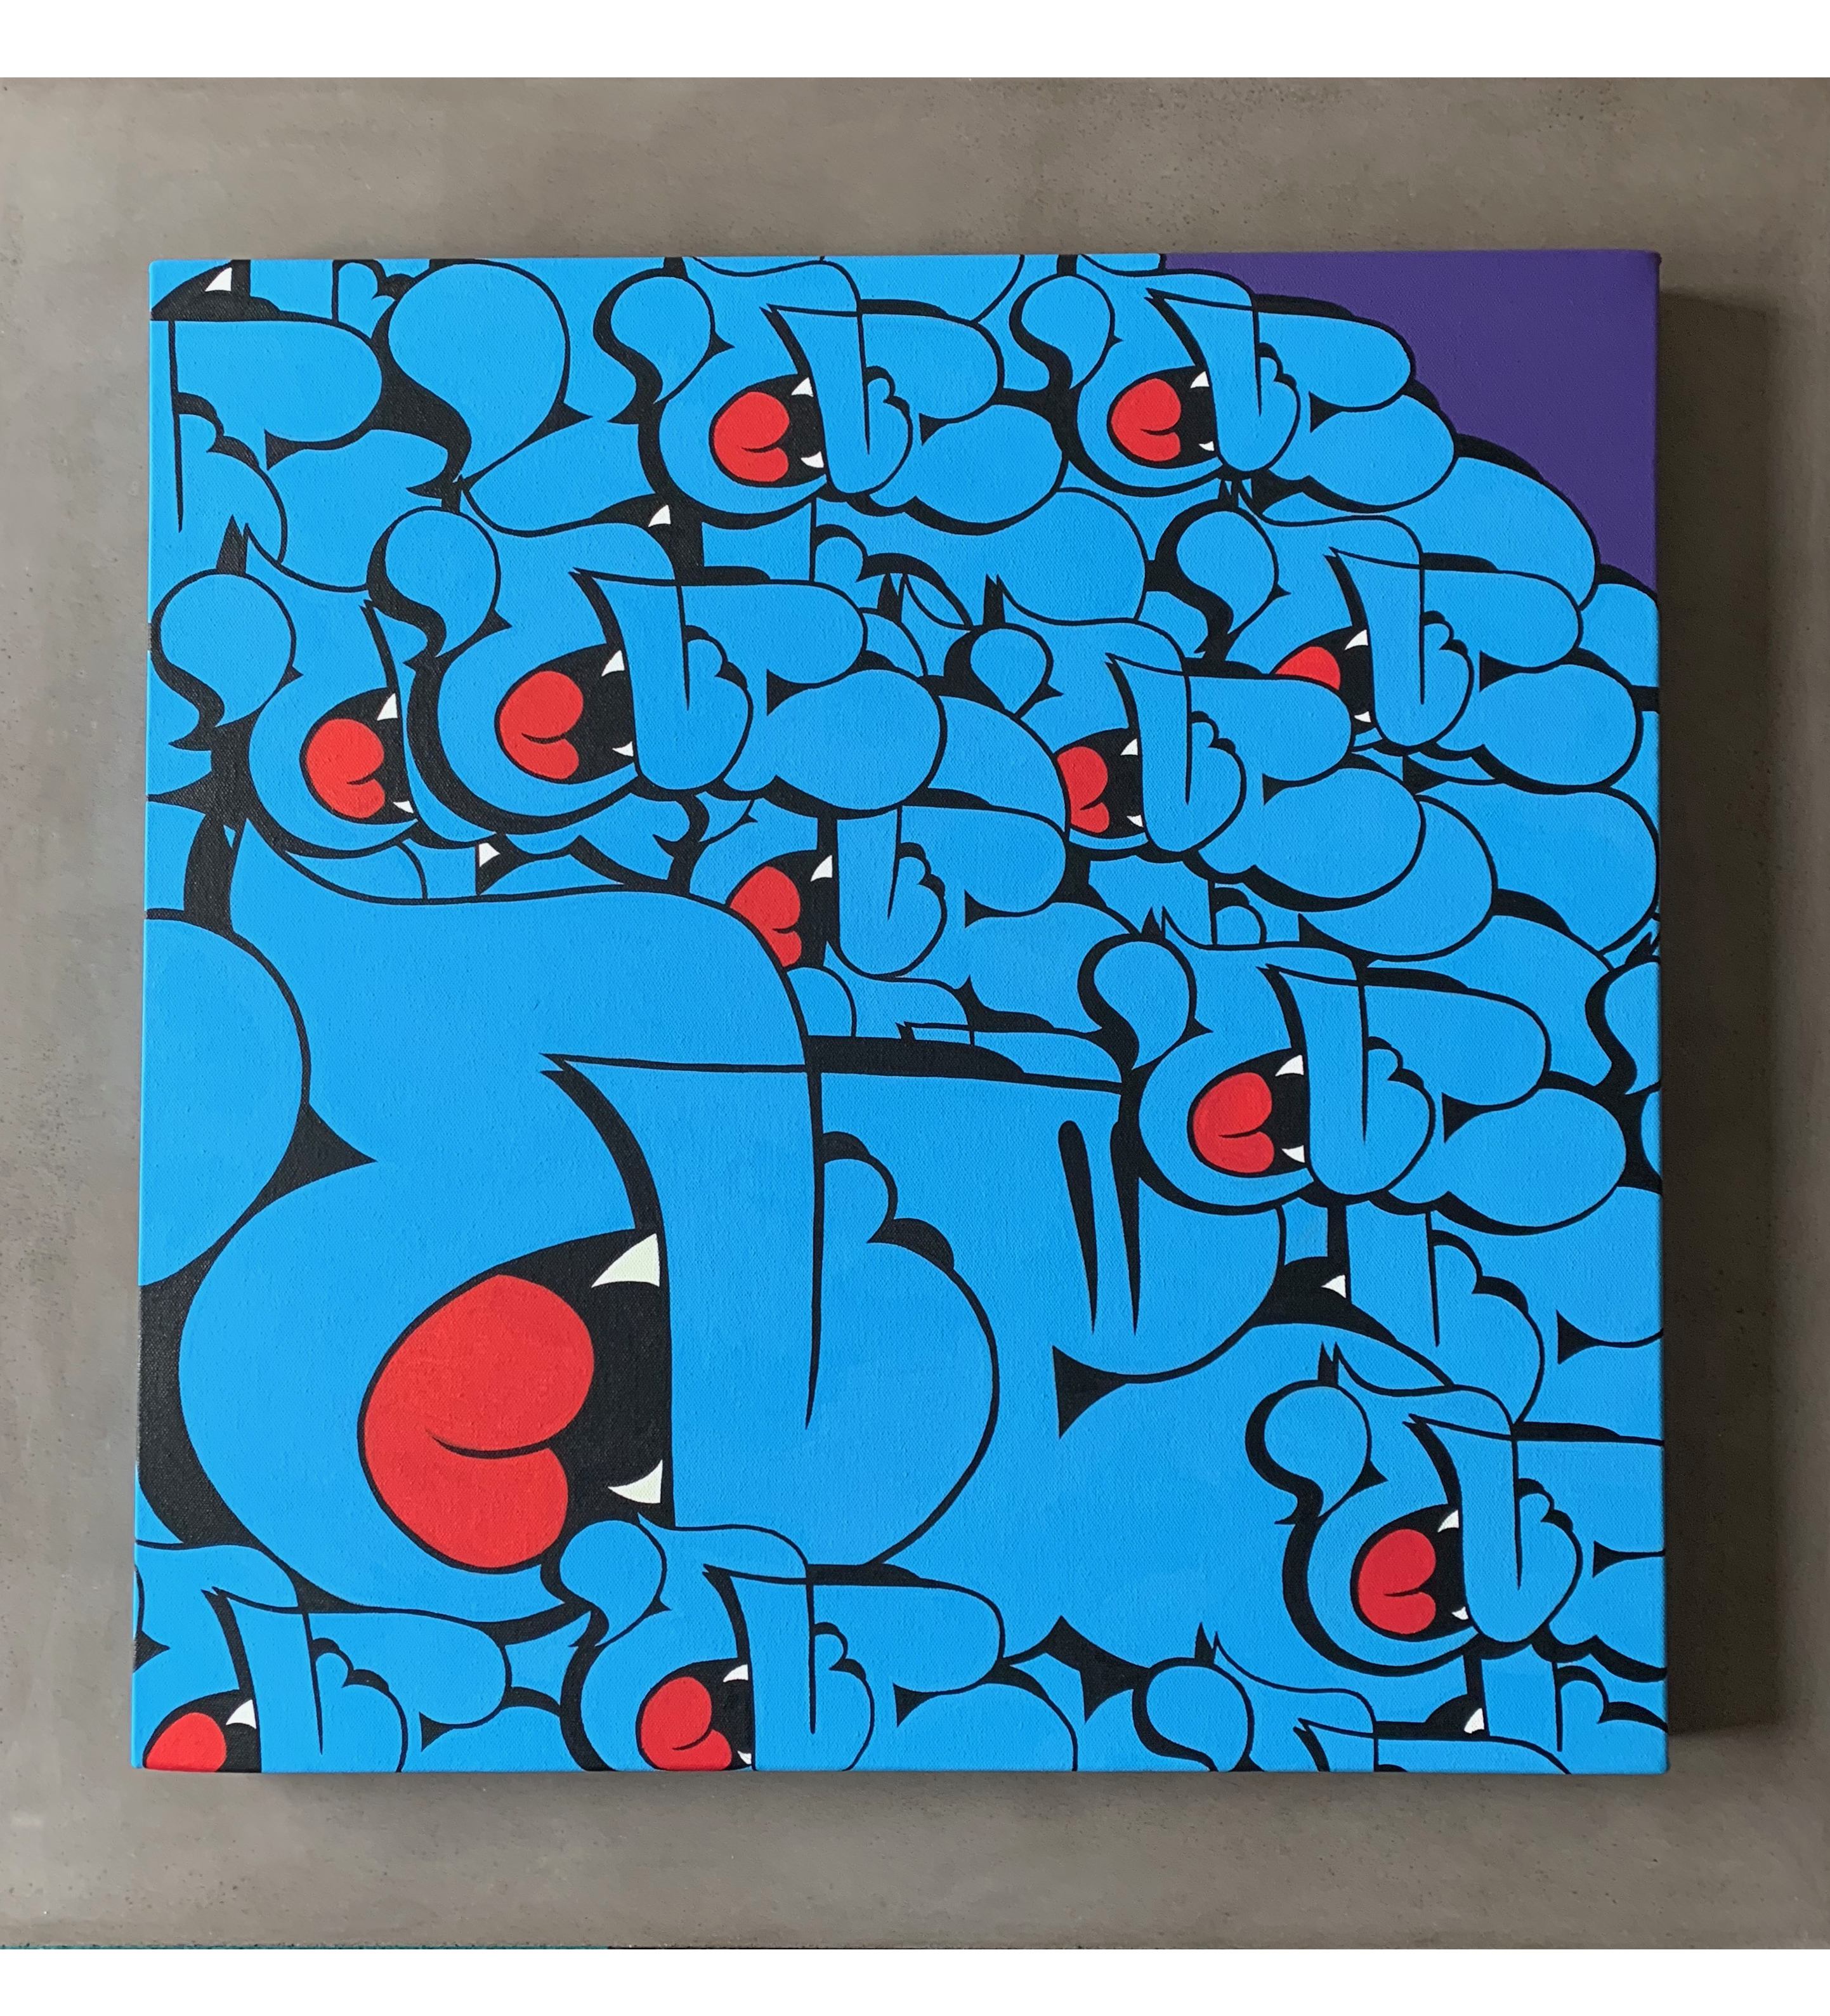 24' Throwie Canvas by Nover, Acrylic Paint & Markers, 2019.